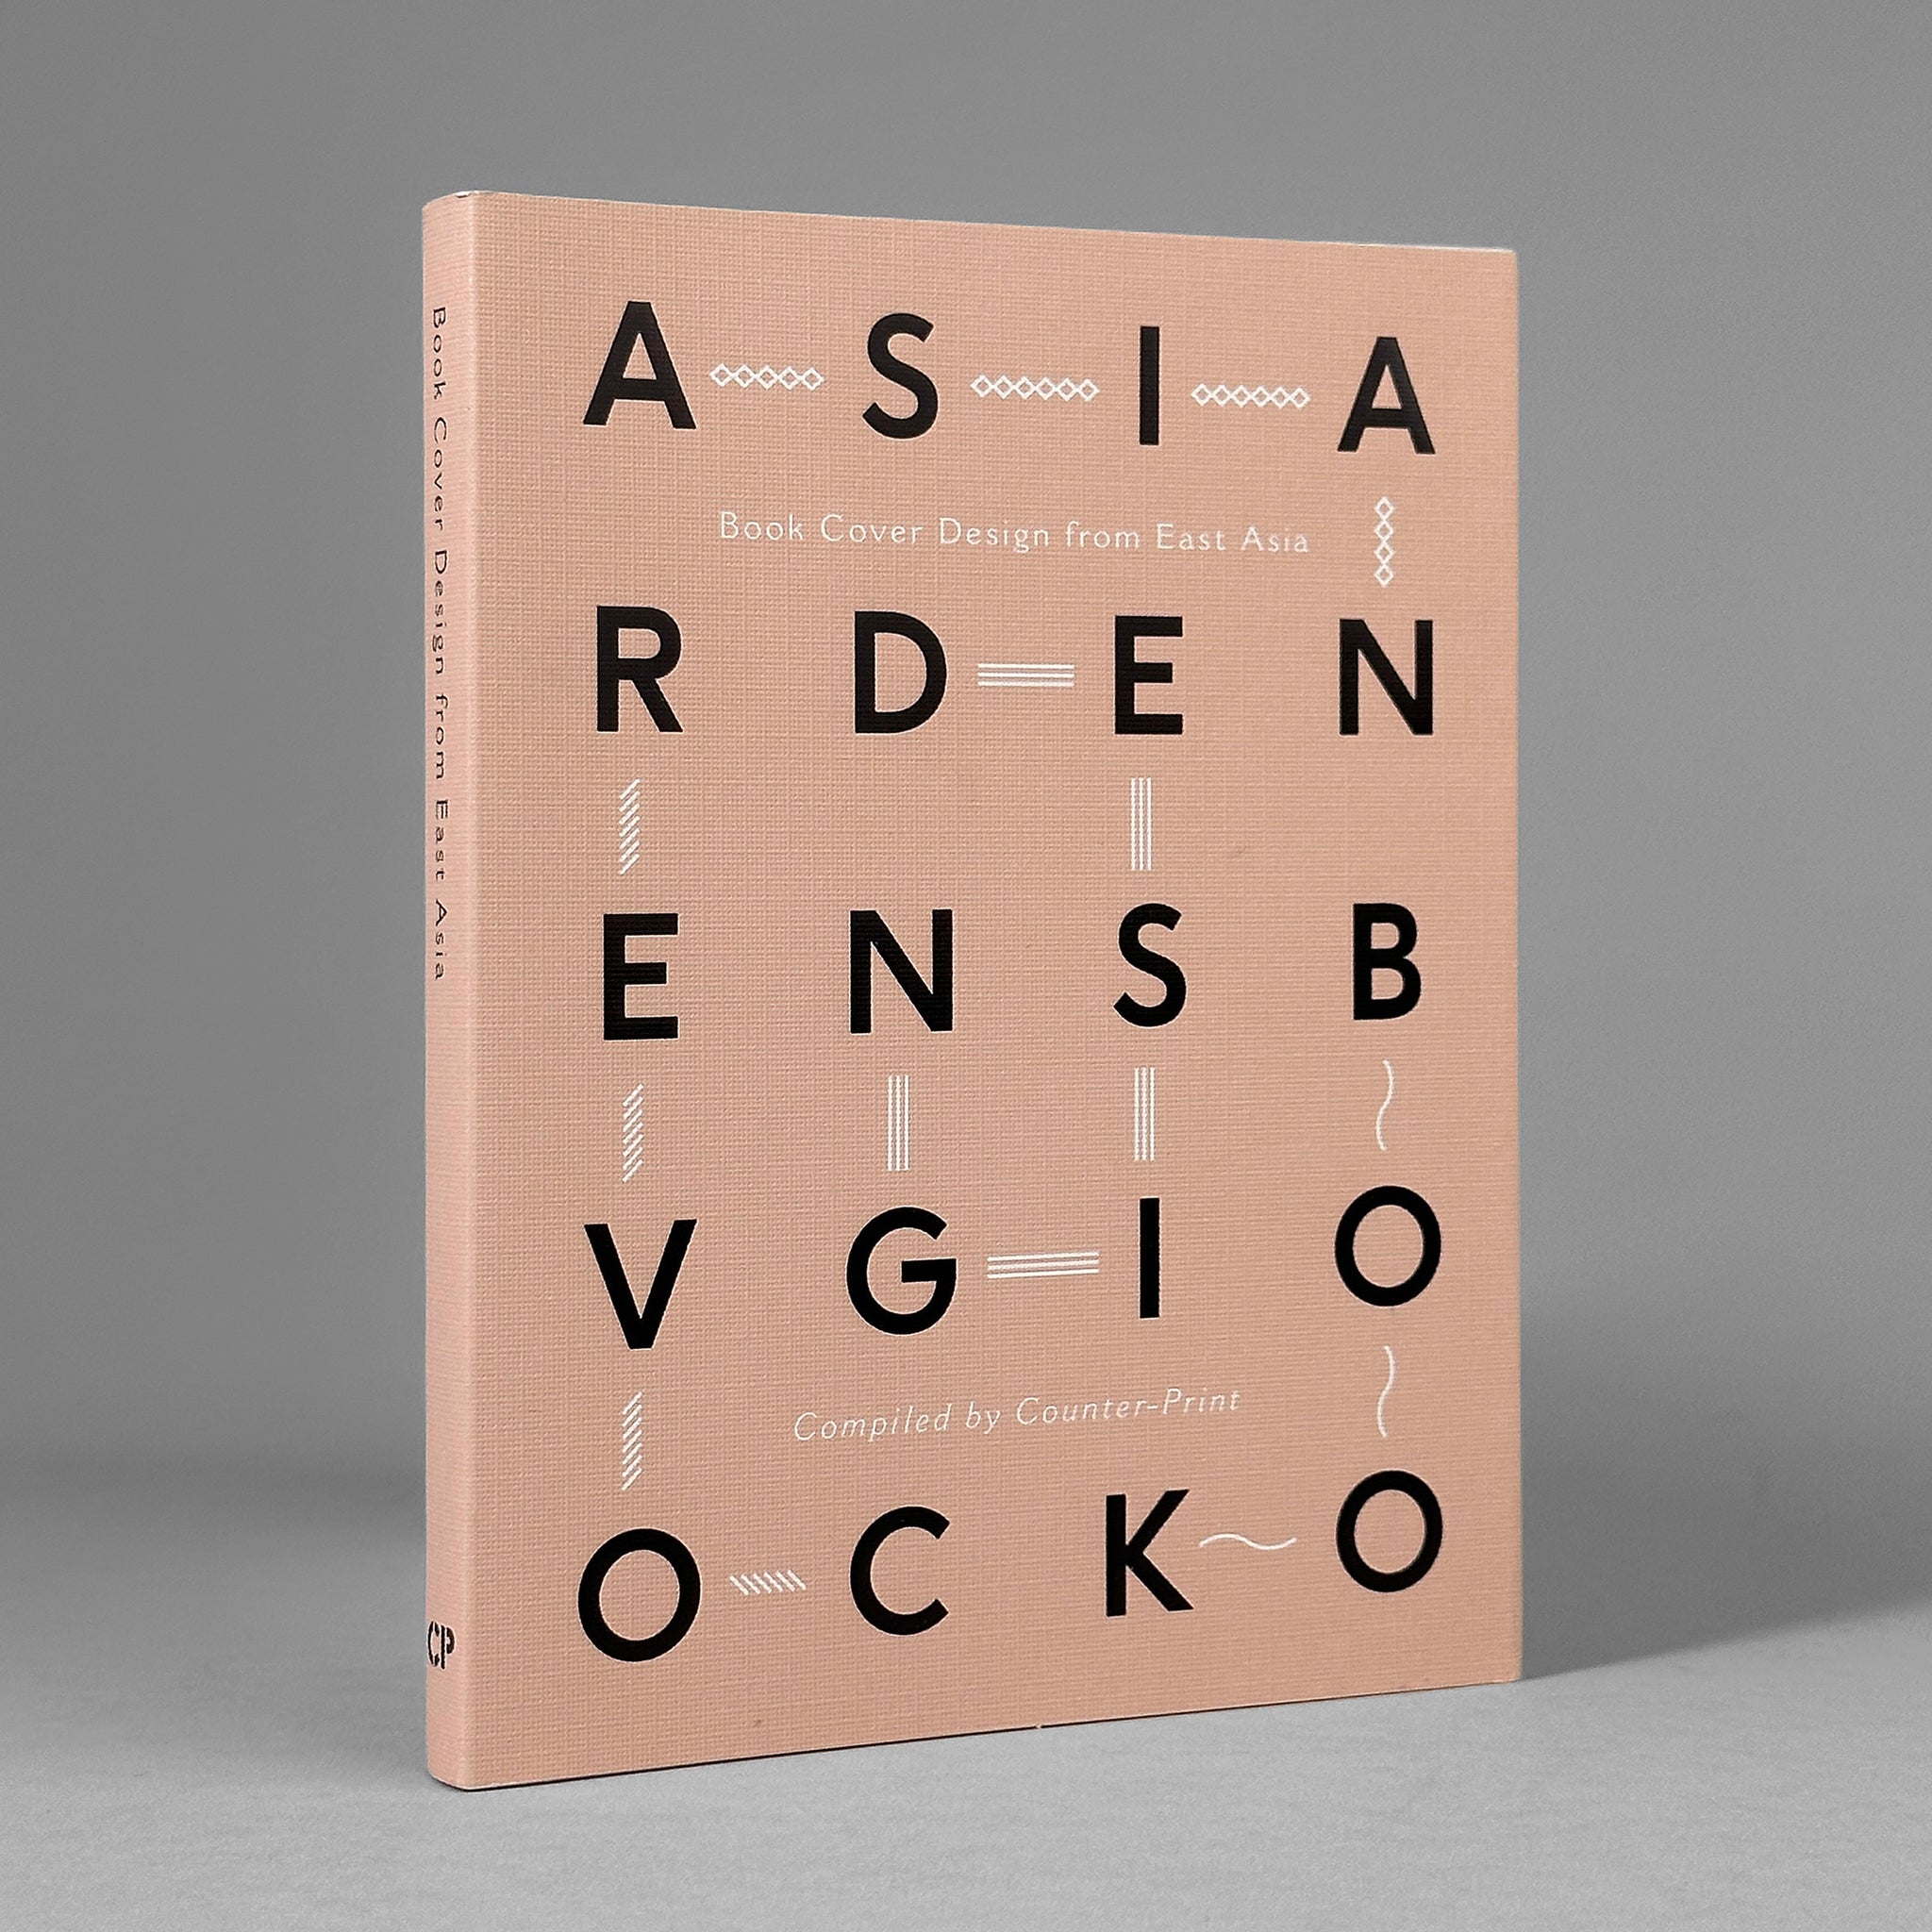 Book Cover Design From East Asia